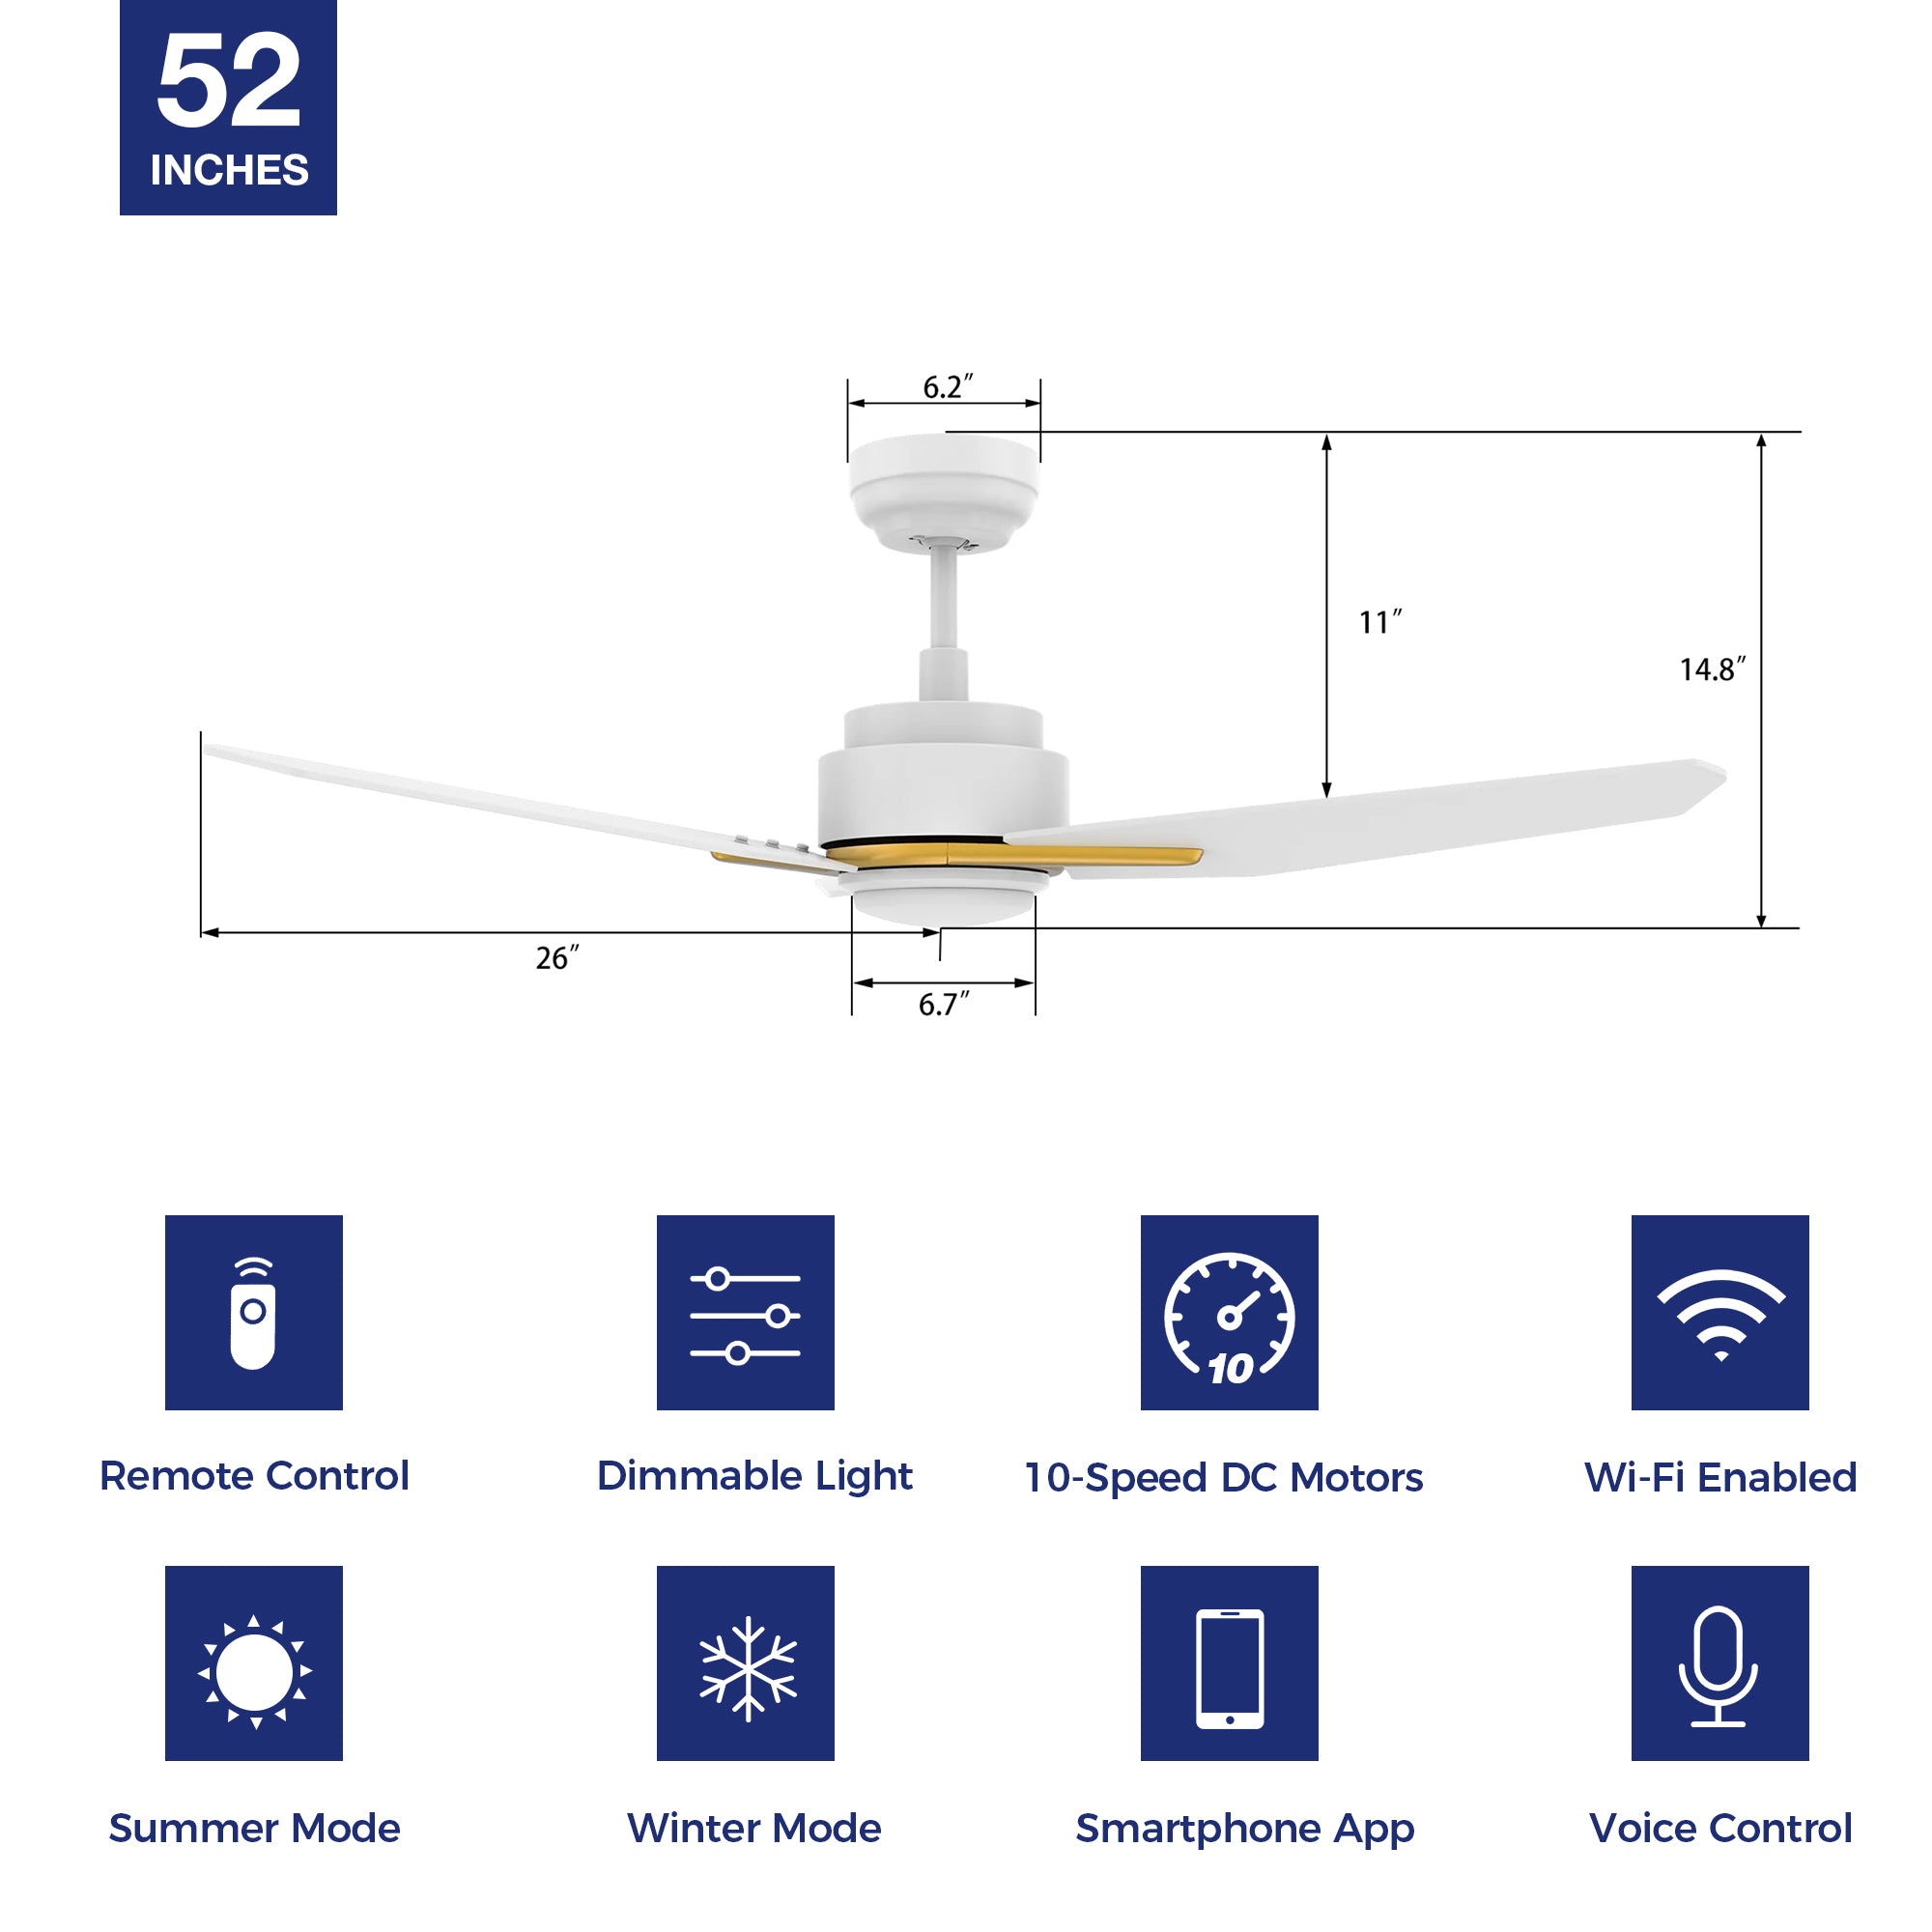 This Tilbury 52&#39;&#39; smart ceiling fan keeps your space cool, bright, and stylish. It is a soft modern masterpiece perfect for your large indoor living spaces. This Wifi smart ceiling fan is a simplicity designing with White finish, use elegant Plywood blades and has an integrated 4000K LED cool light. The fan features Remote control, Wi-Fi apps, Siri Shortcut and Voice control technology (compatible with Amazon Alexa and Google Home Assistant ) to set fan preferences.